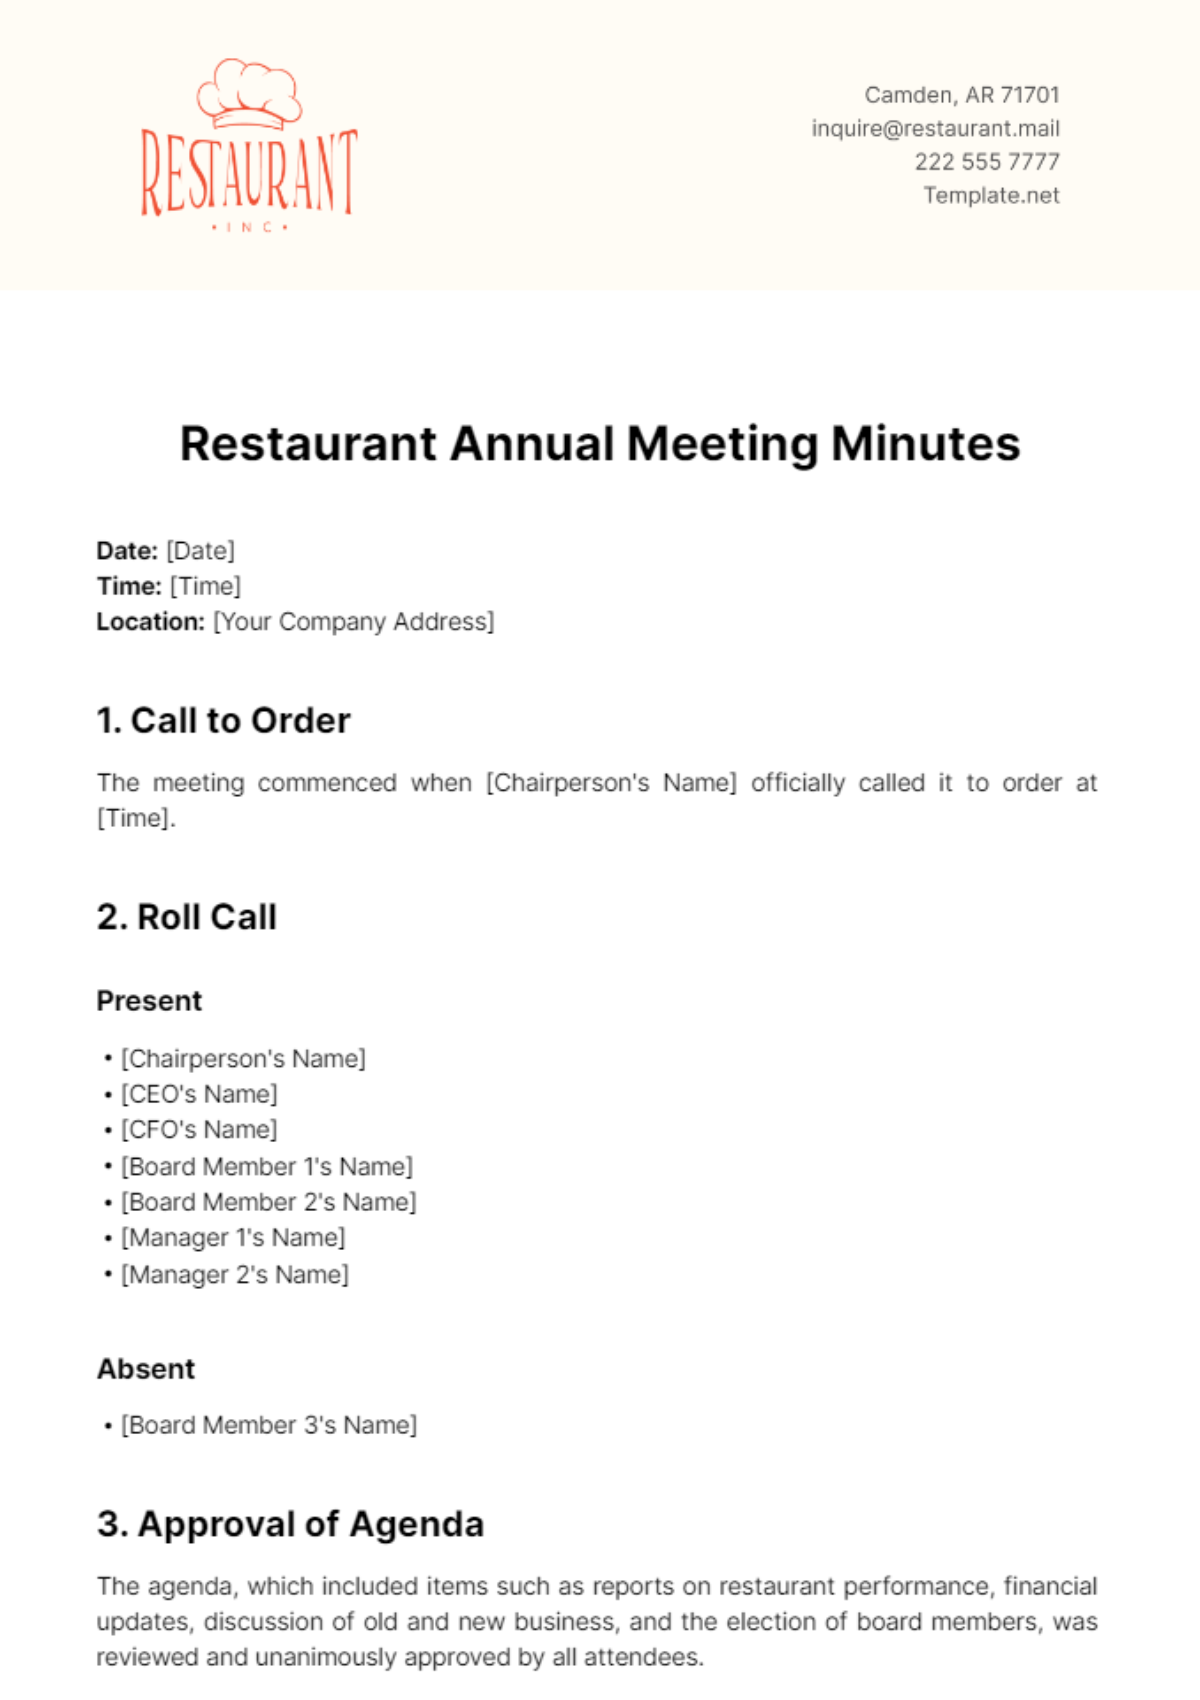 Restaurant Annual Meeting Minutes Template